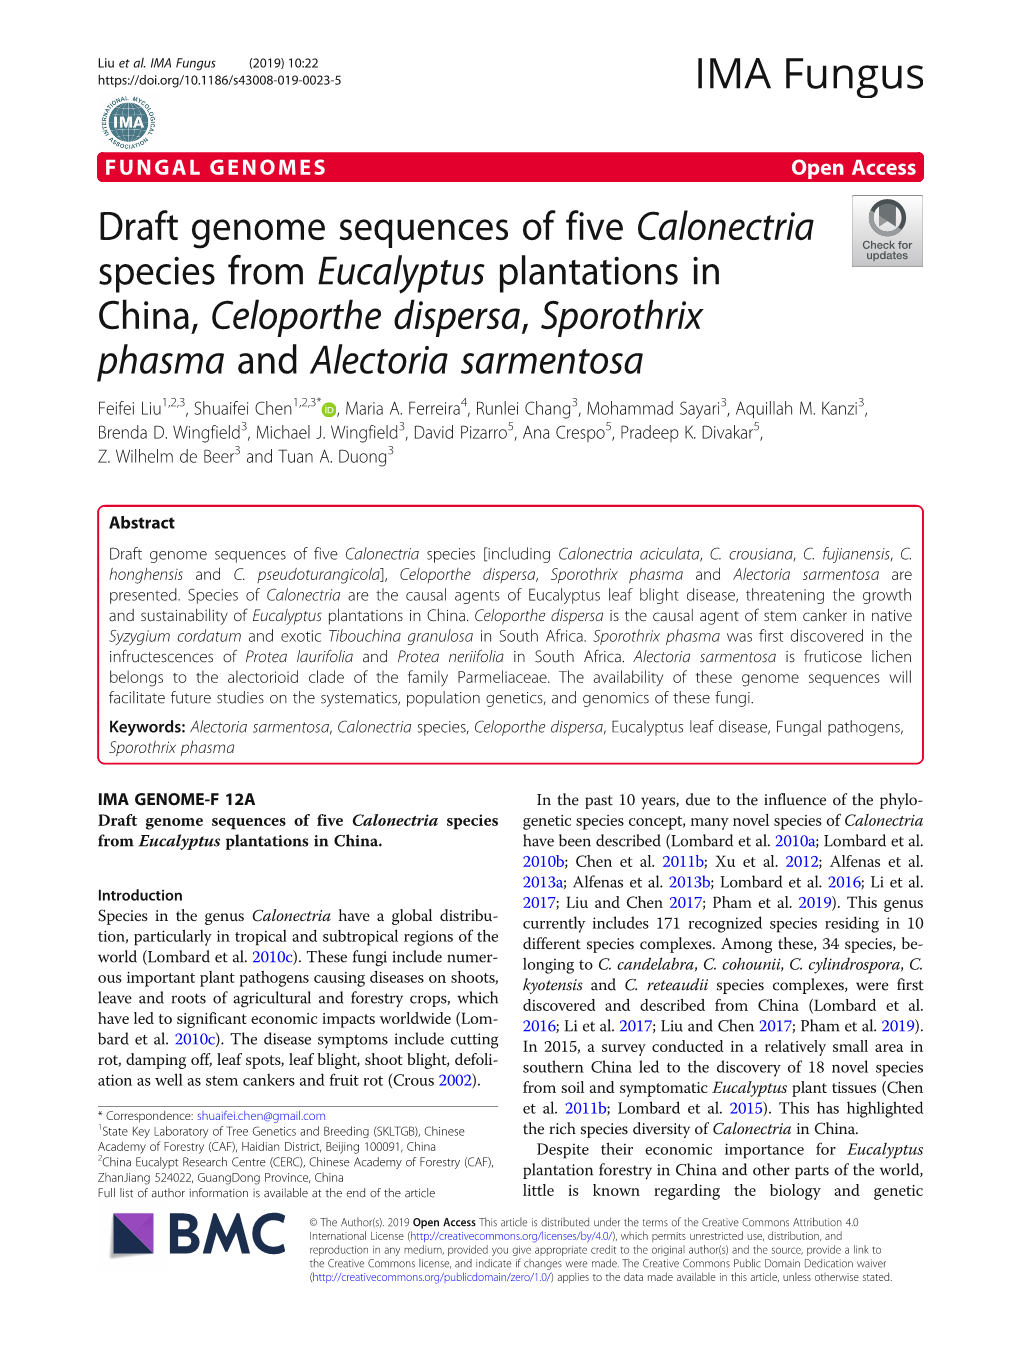 Draft Genome Sequences of Five Calonectria Species From